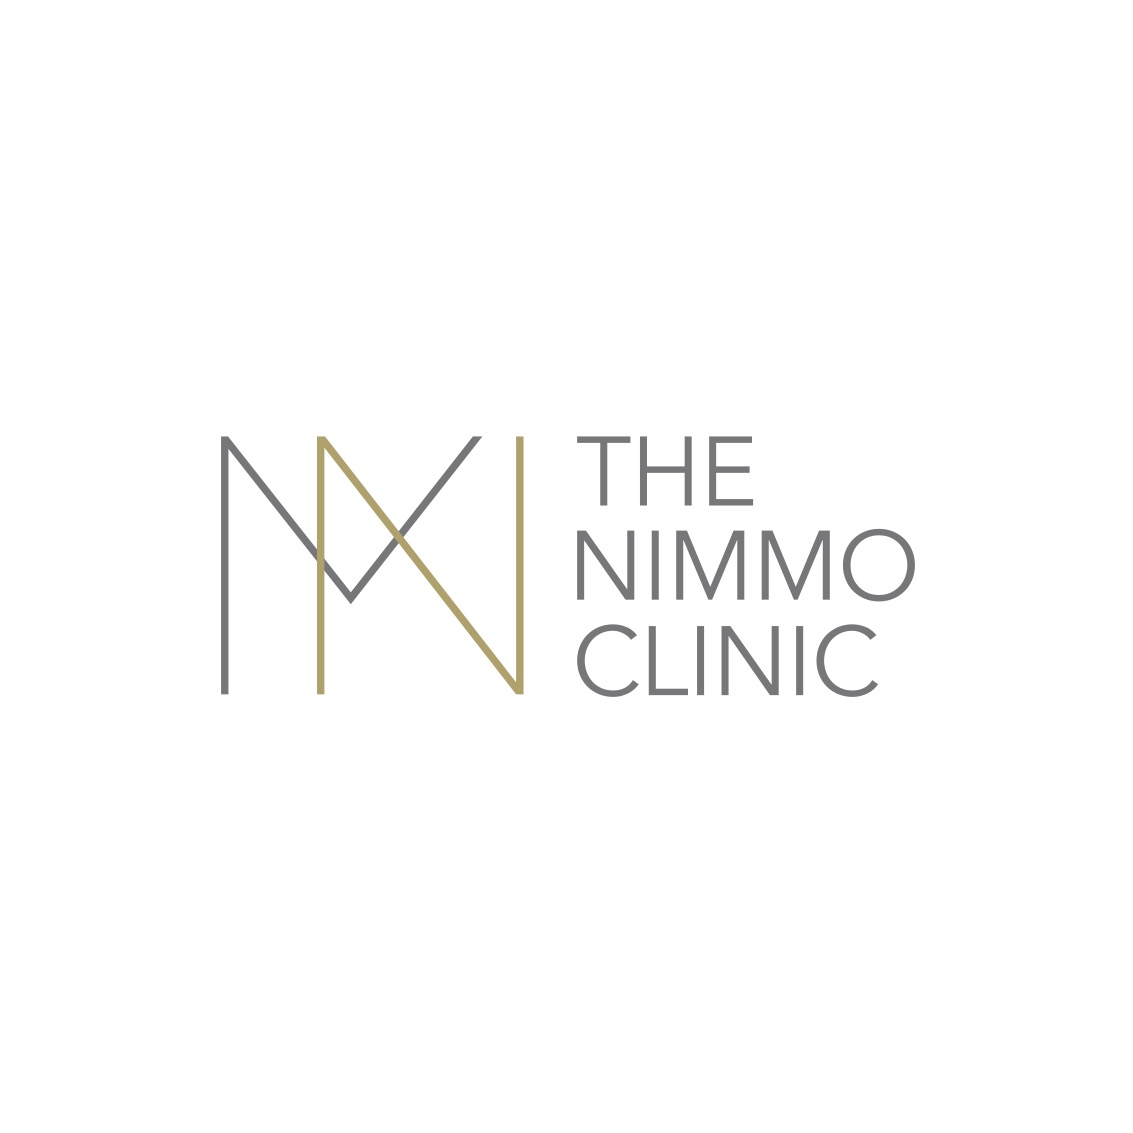 The Nimmo Clinic